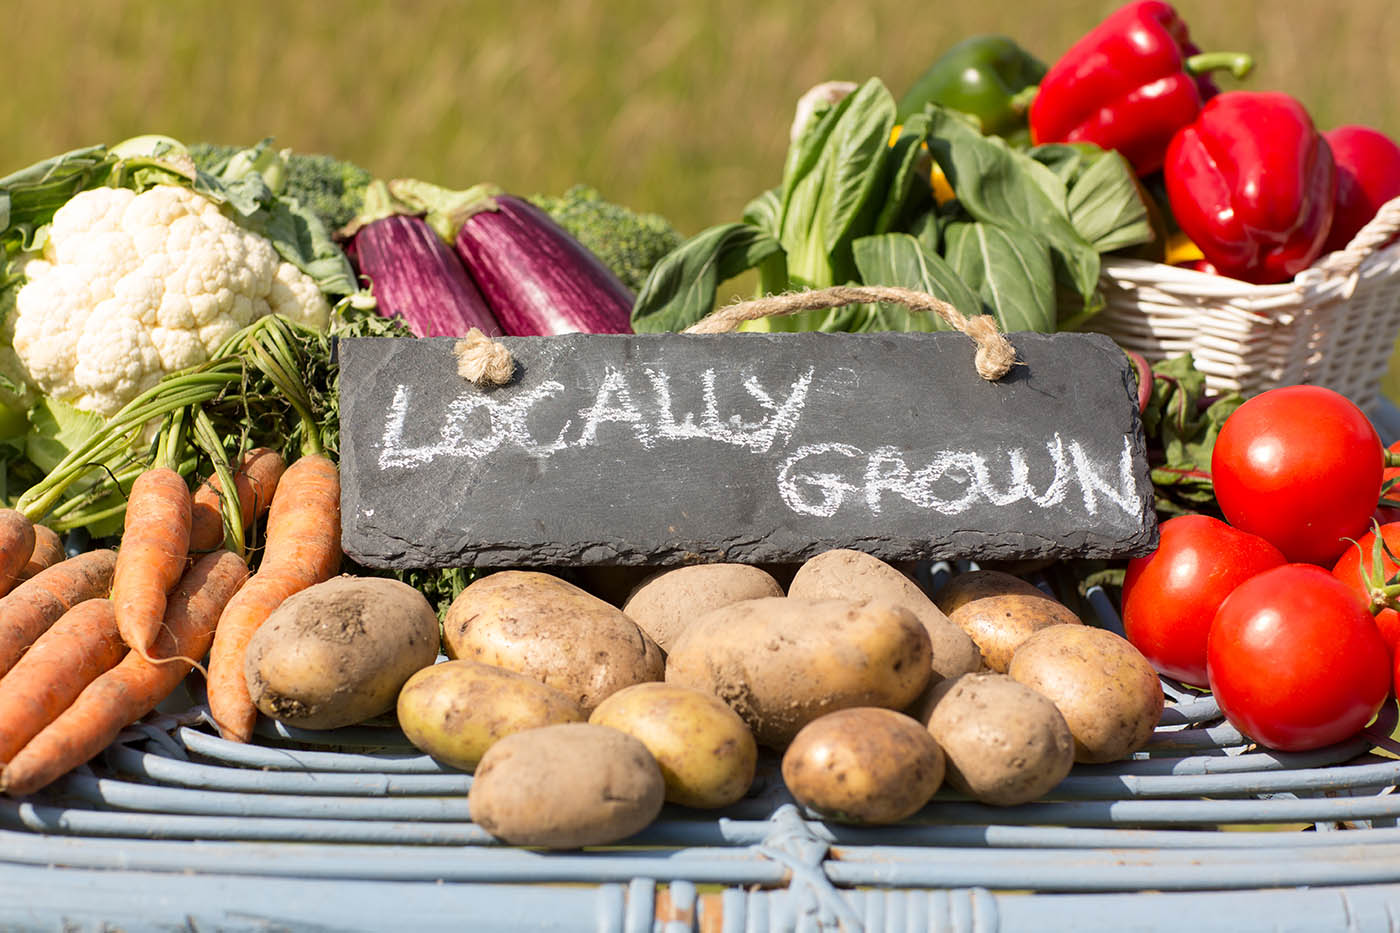 How to Communicate “Locally Grown”